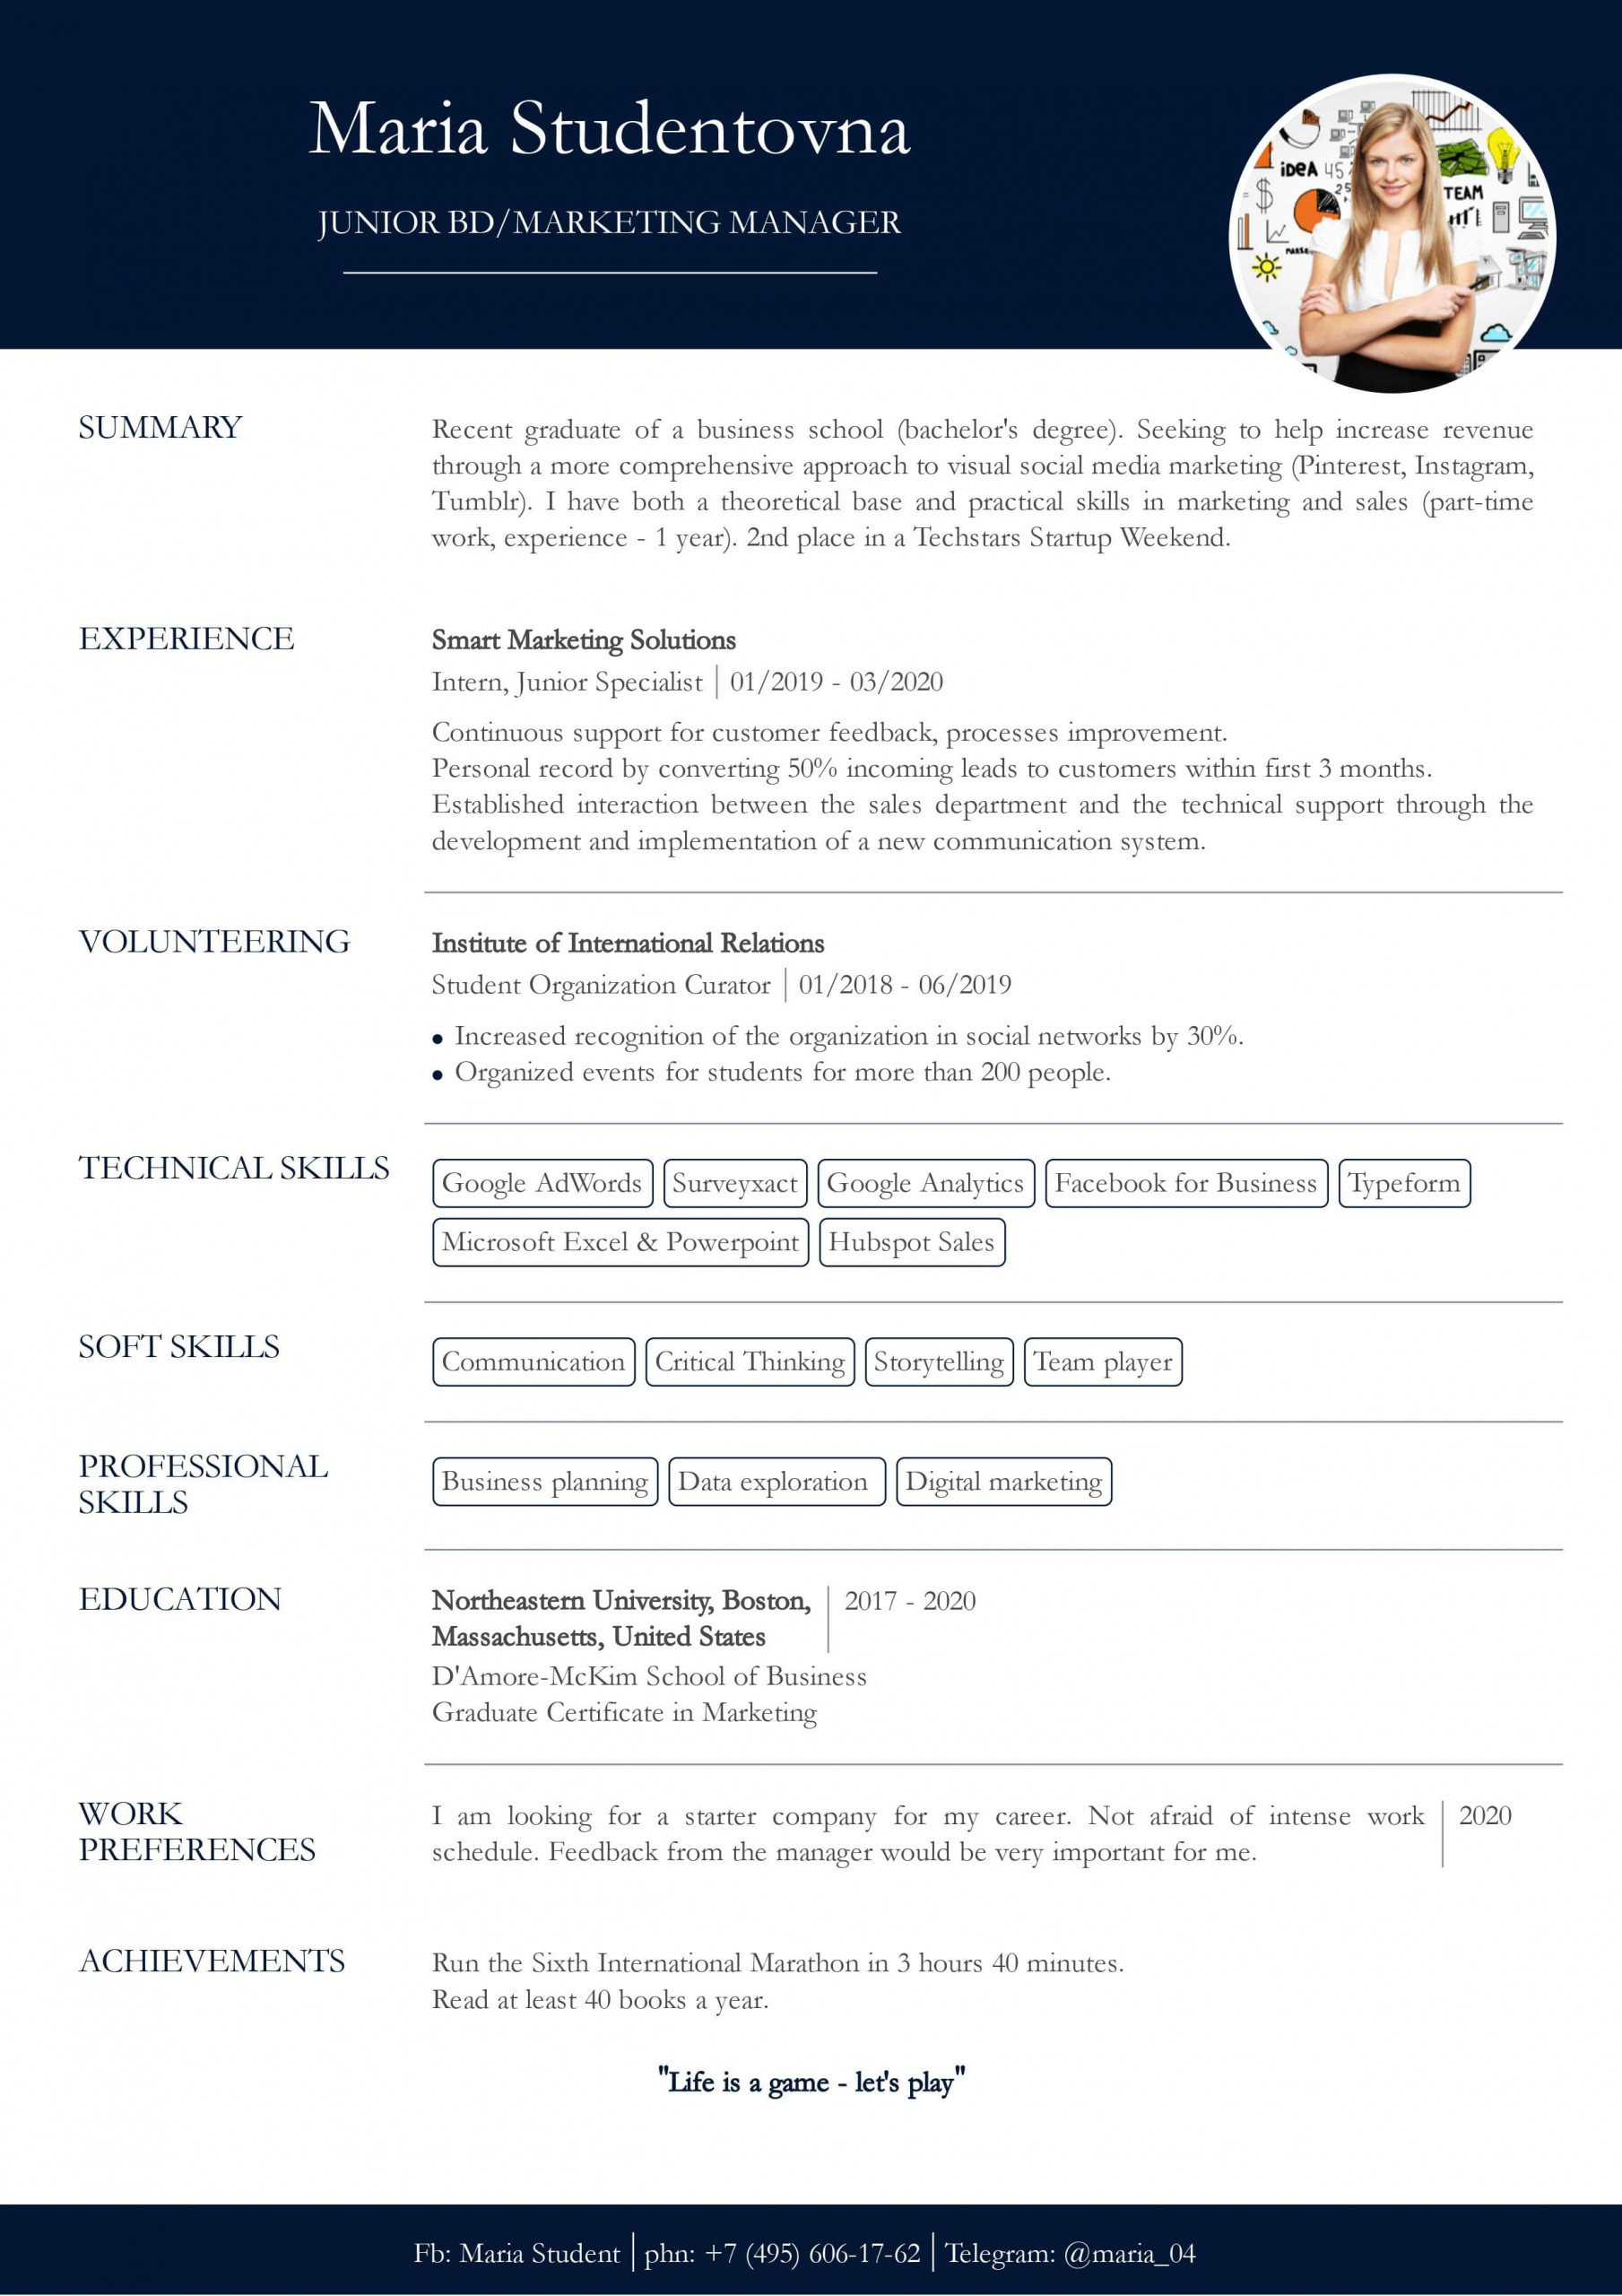 Resume for Beginners with No Experience Sample Resume with No Work Experience. Sample for Students. – Cv2you Blog